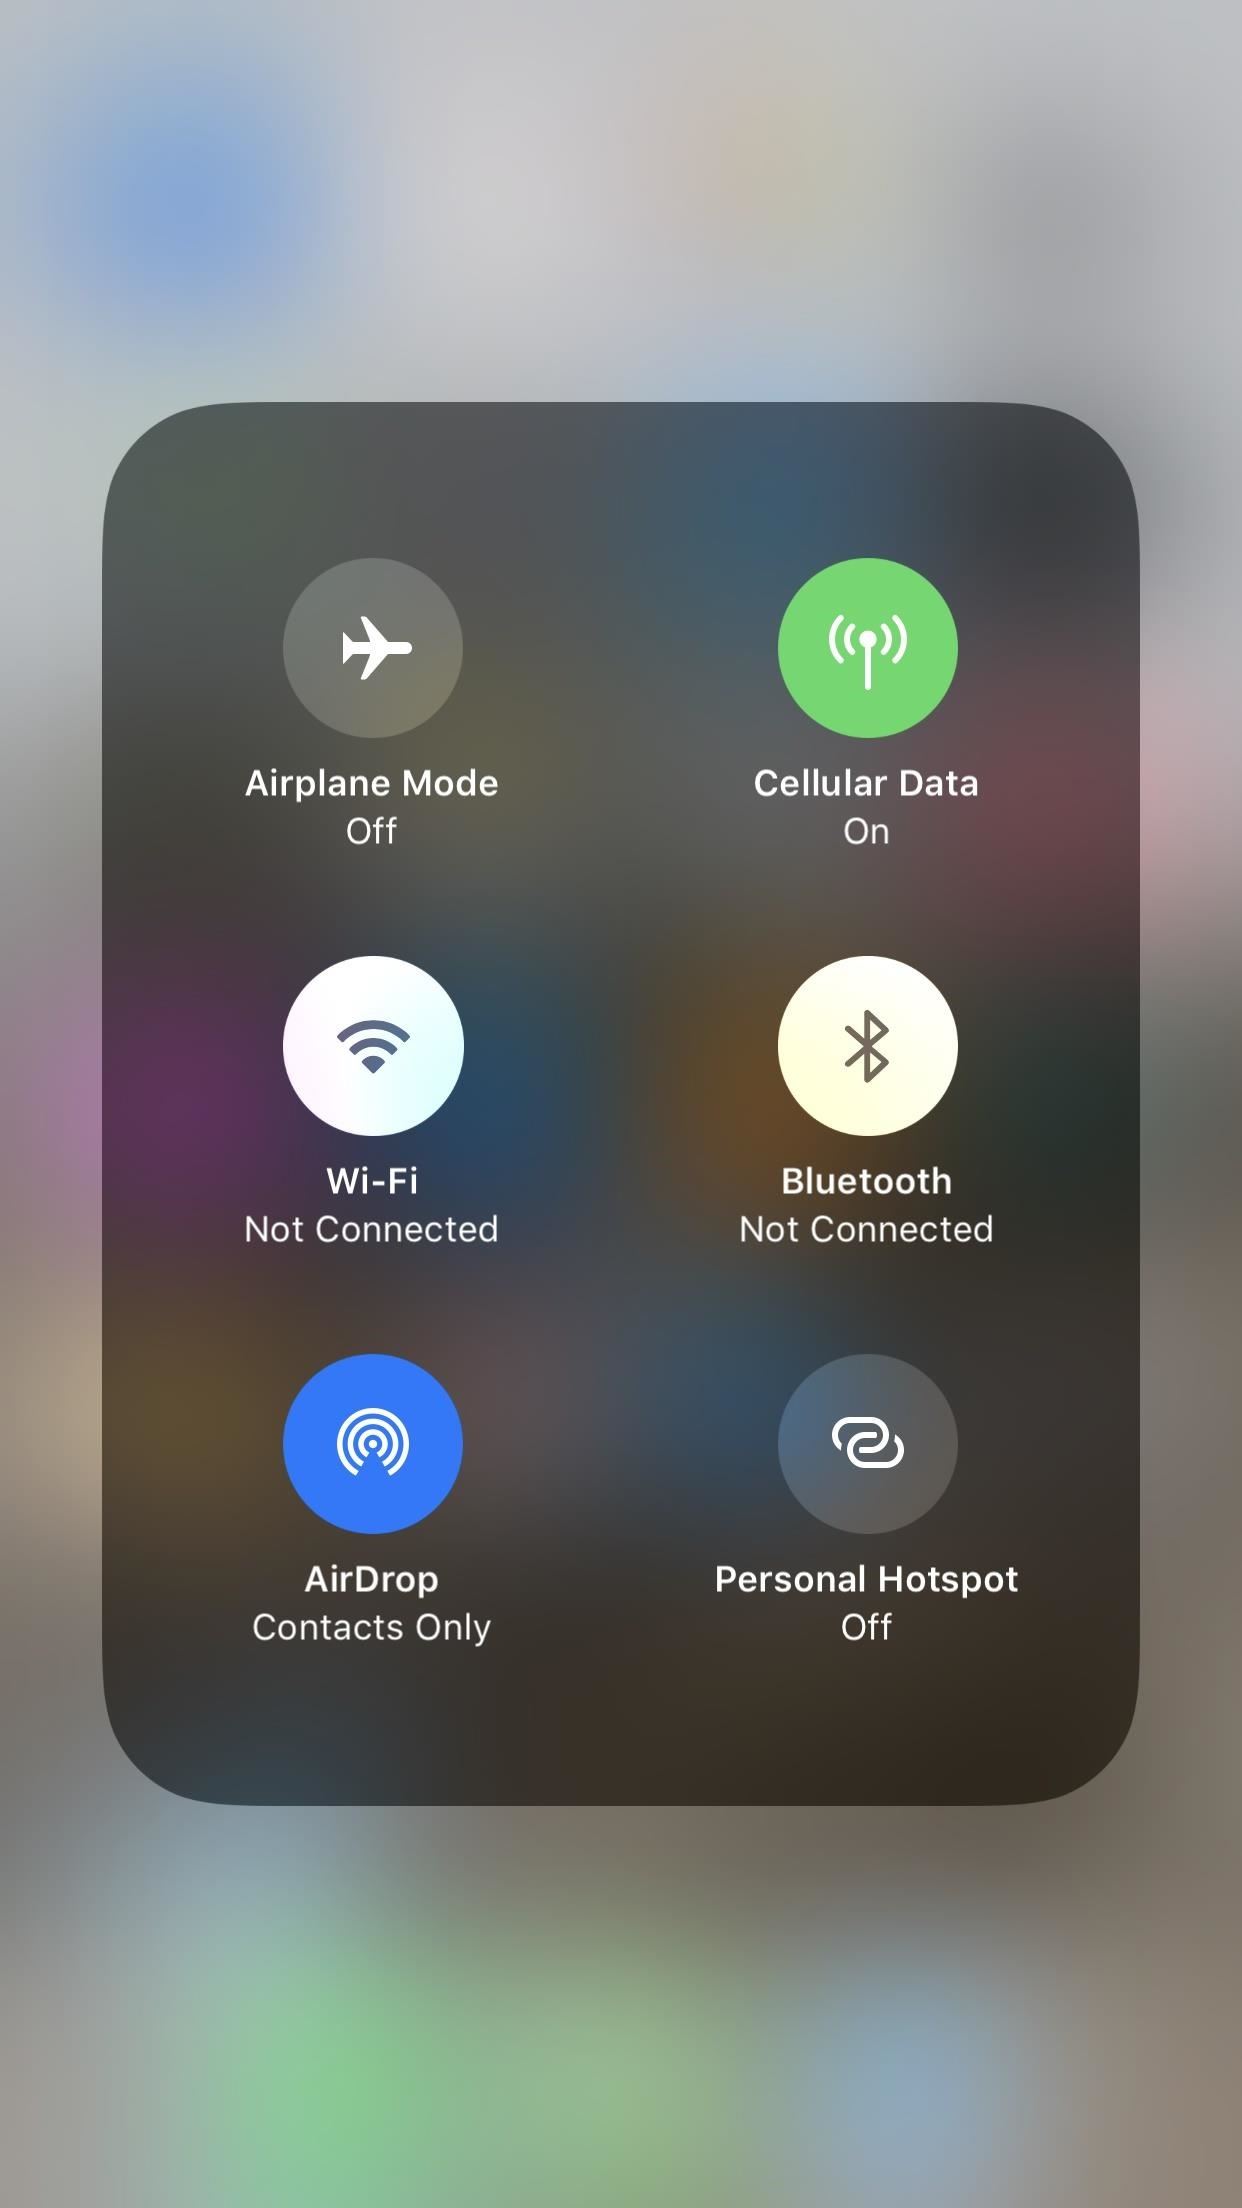 iOS 11.2 Beta 3 Released, Includes Pop-Up Alerts for Wi-Fi & Bluetooth Controls, New Control Center Bar